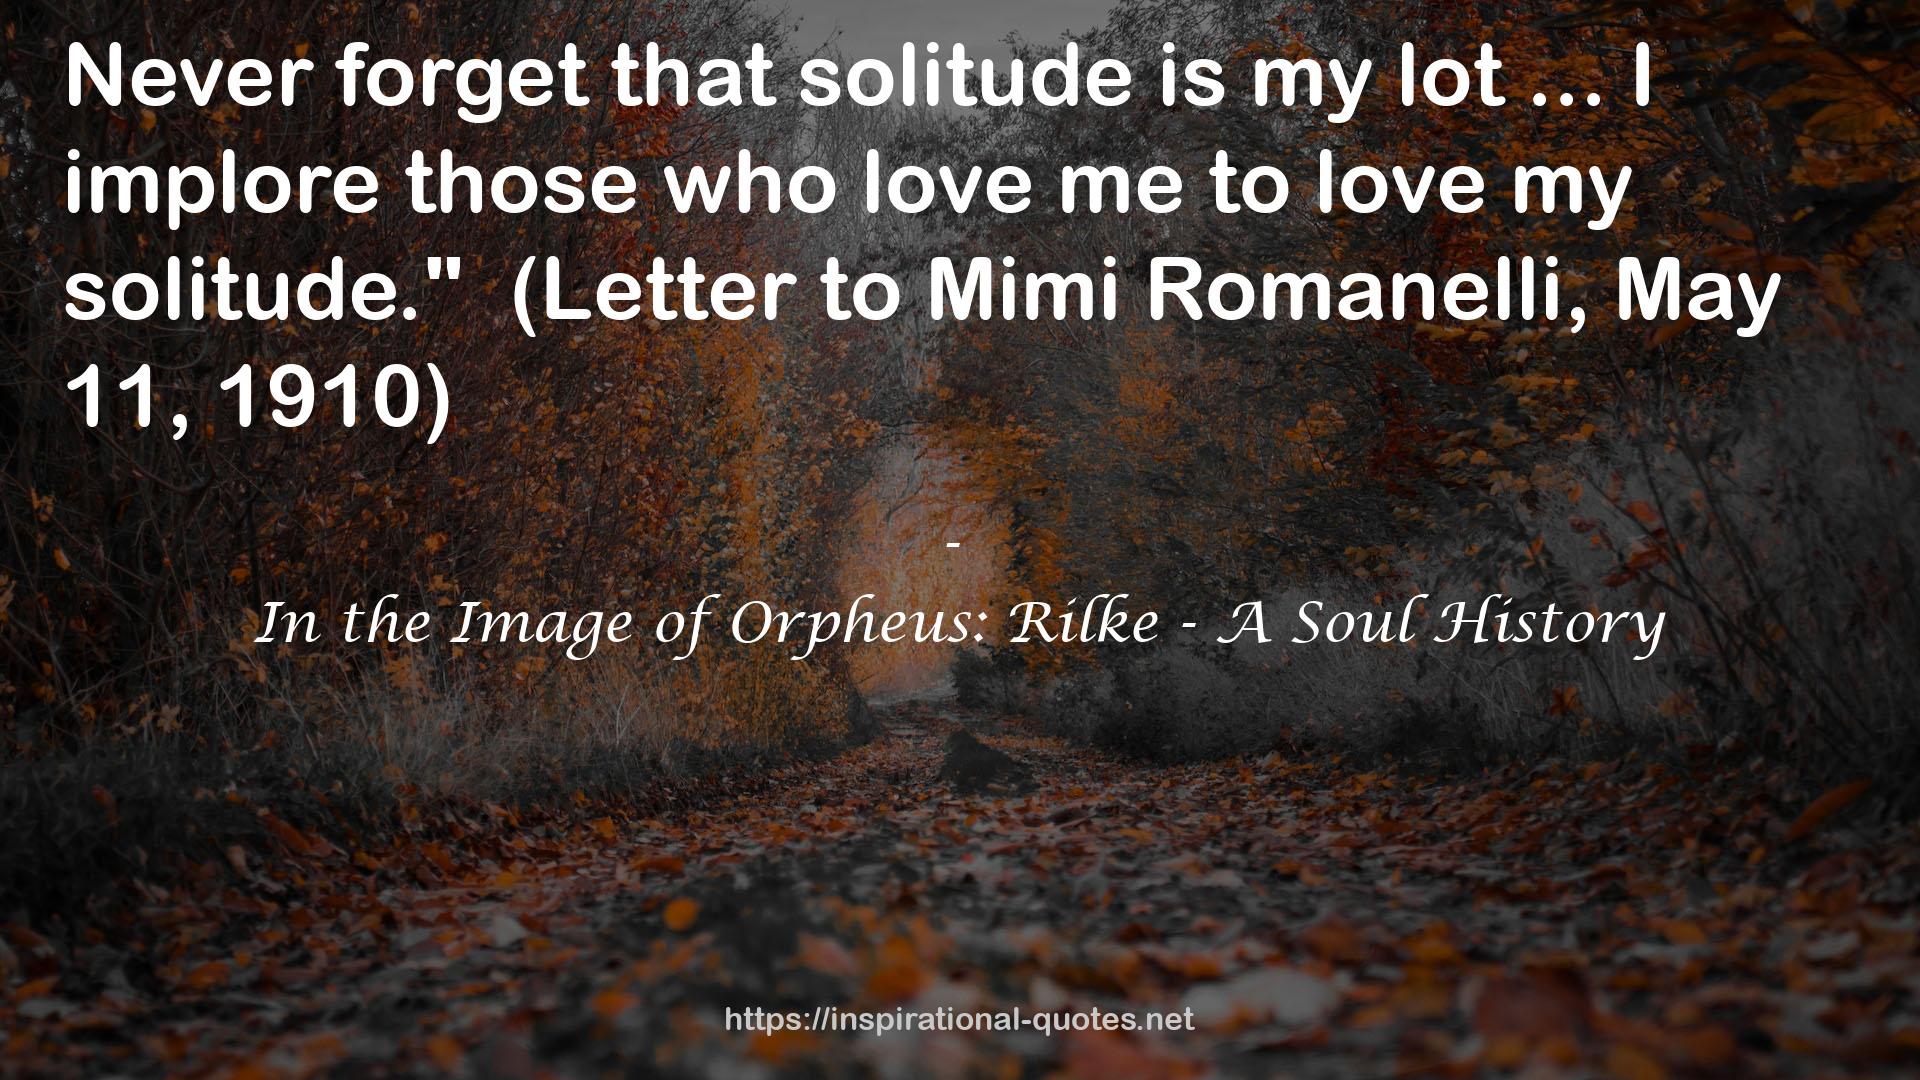 In the Image of Orpheus: Rilke - A Soul History QUOTES